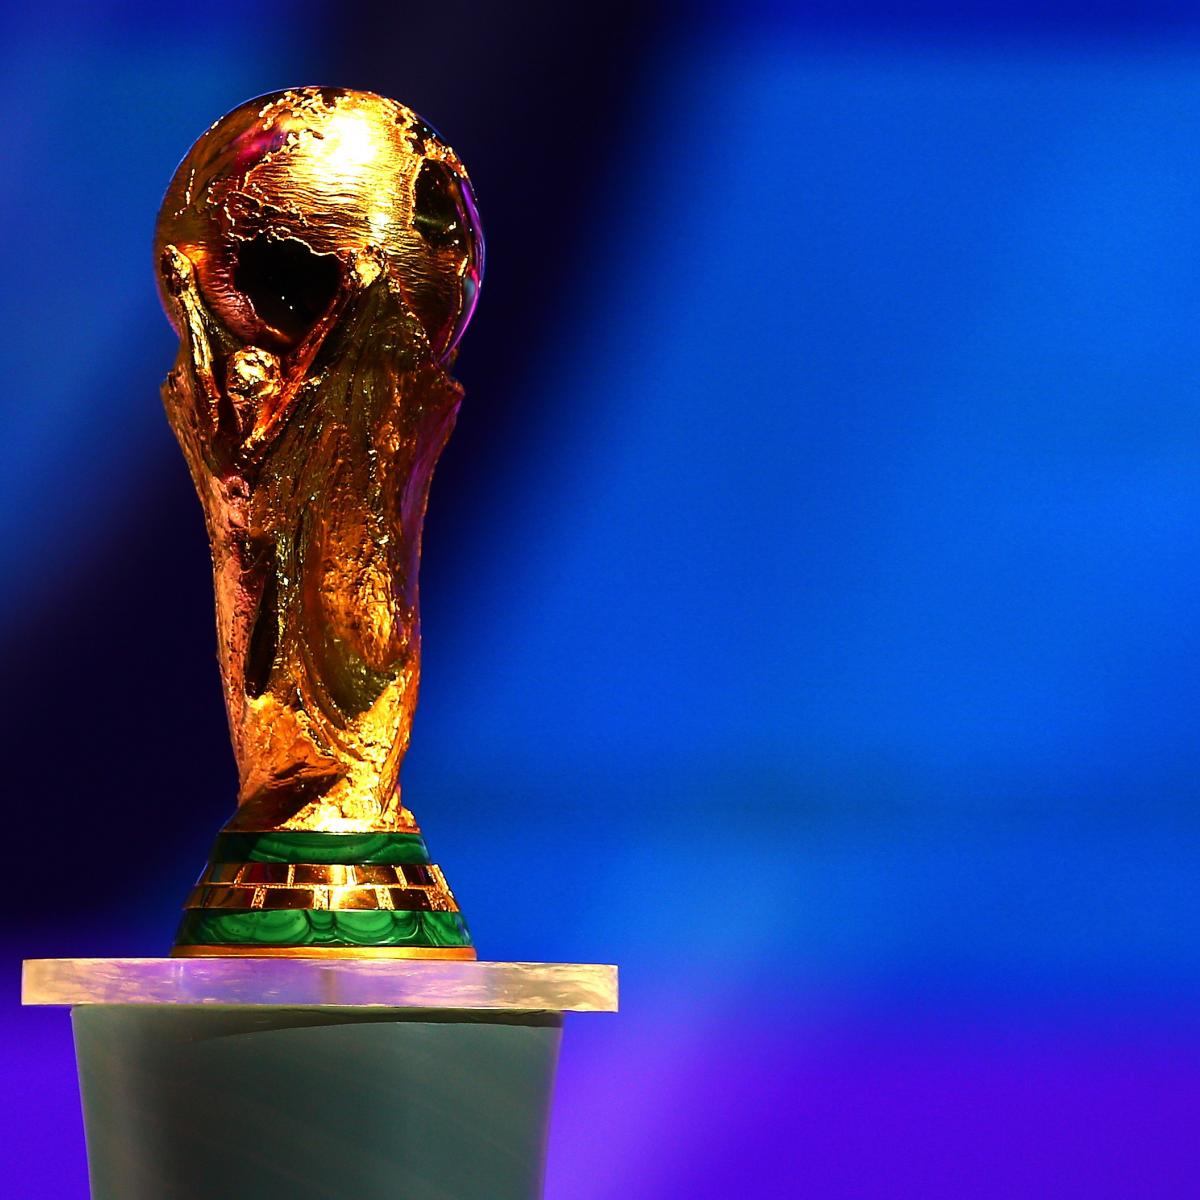 World Cup 2022: FIFA World Cup trophy: History, who designed it and what it  means